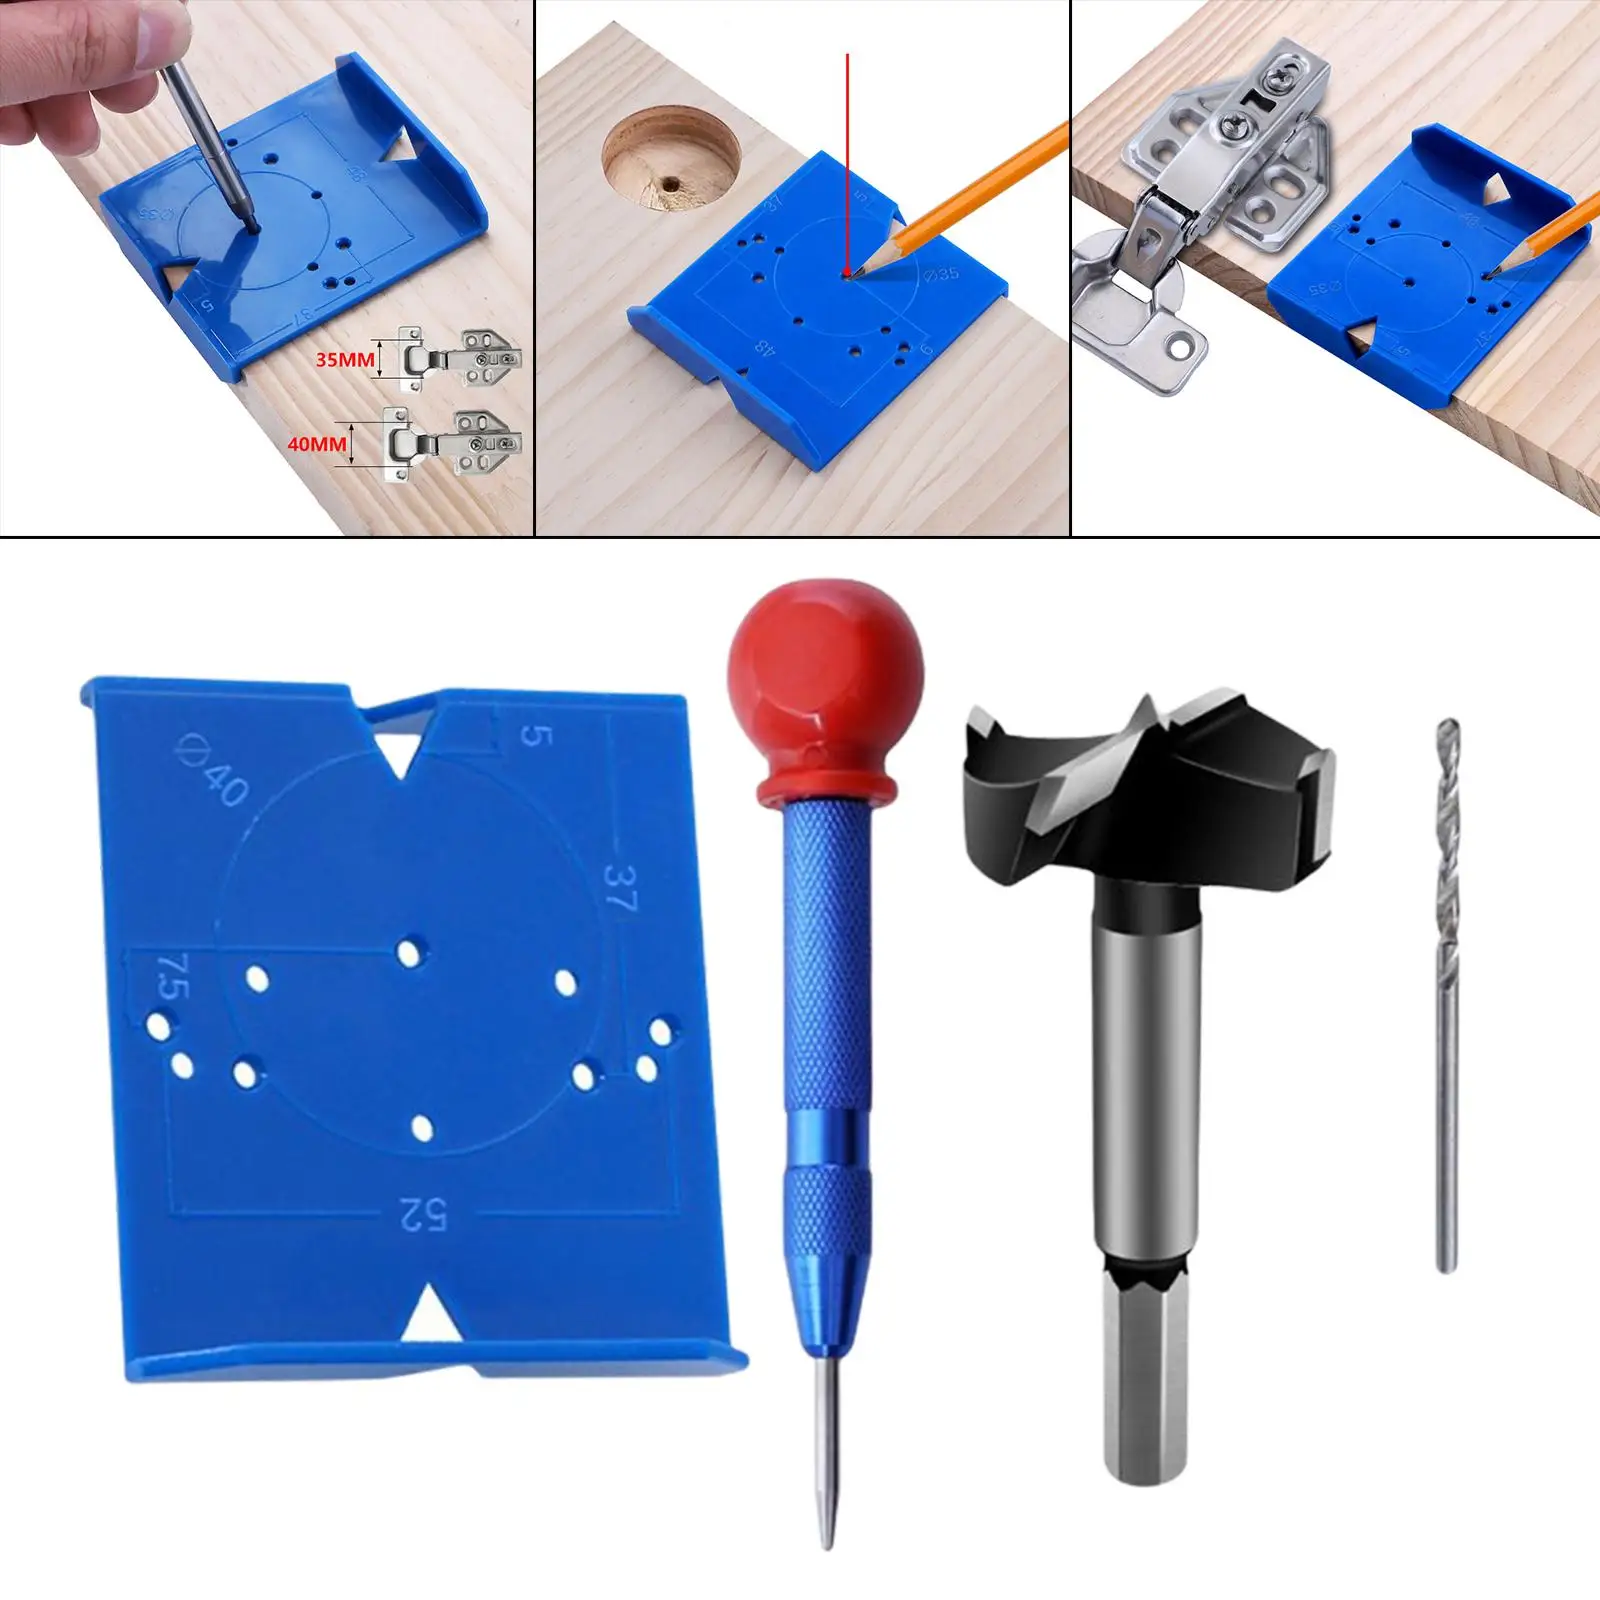 Hinge Opening  Woodworking Tool Hinge Hole Drilling Guide  Hinge Hole Positioning Ruler for Closet Door Furniture